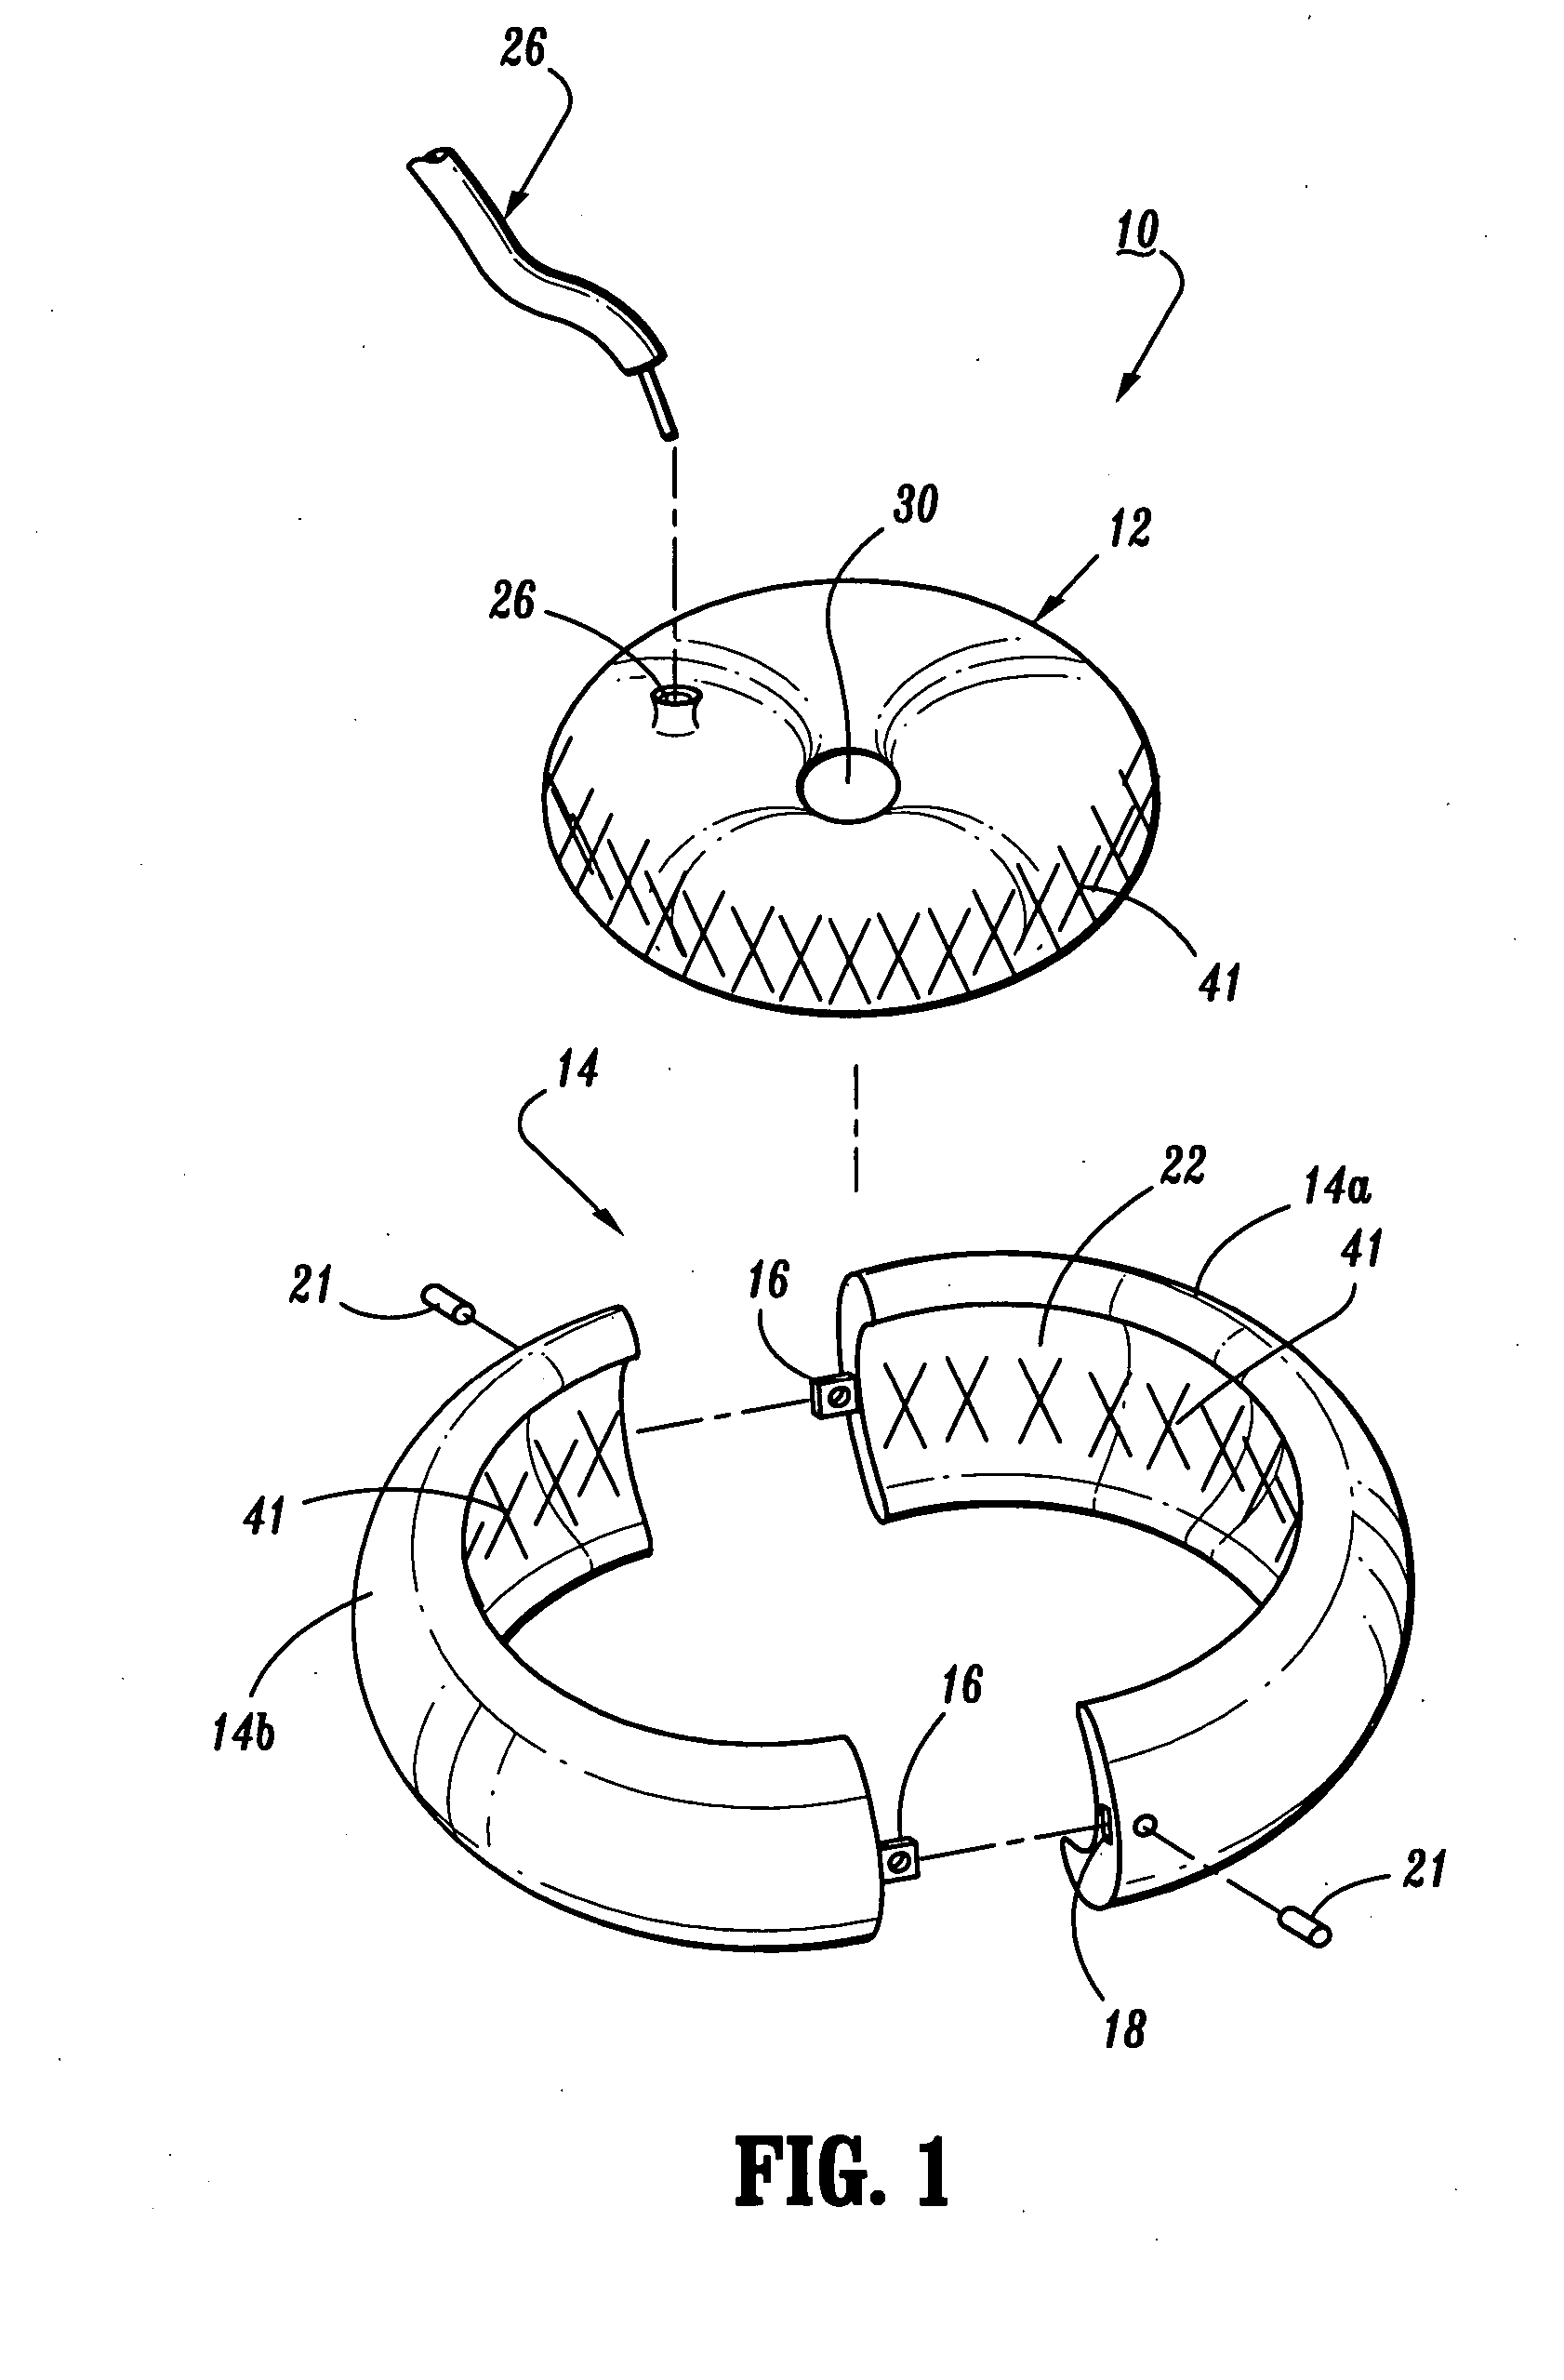 Gastric restrictor assembly and method of use